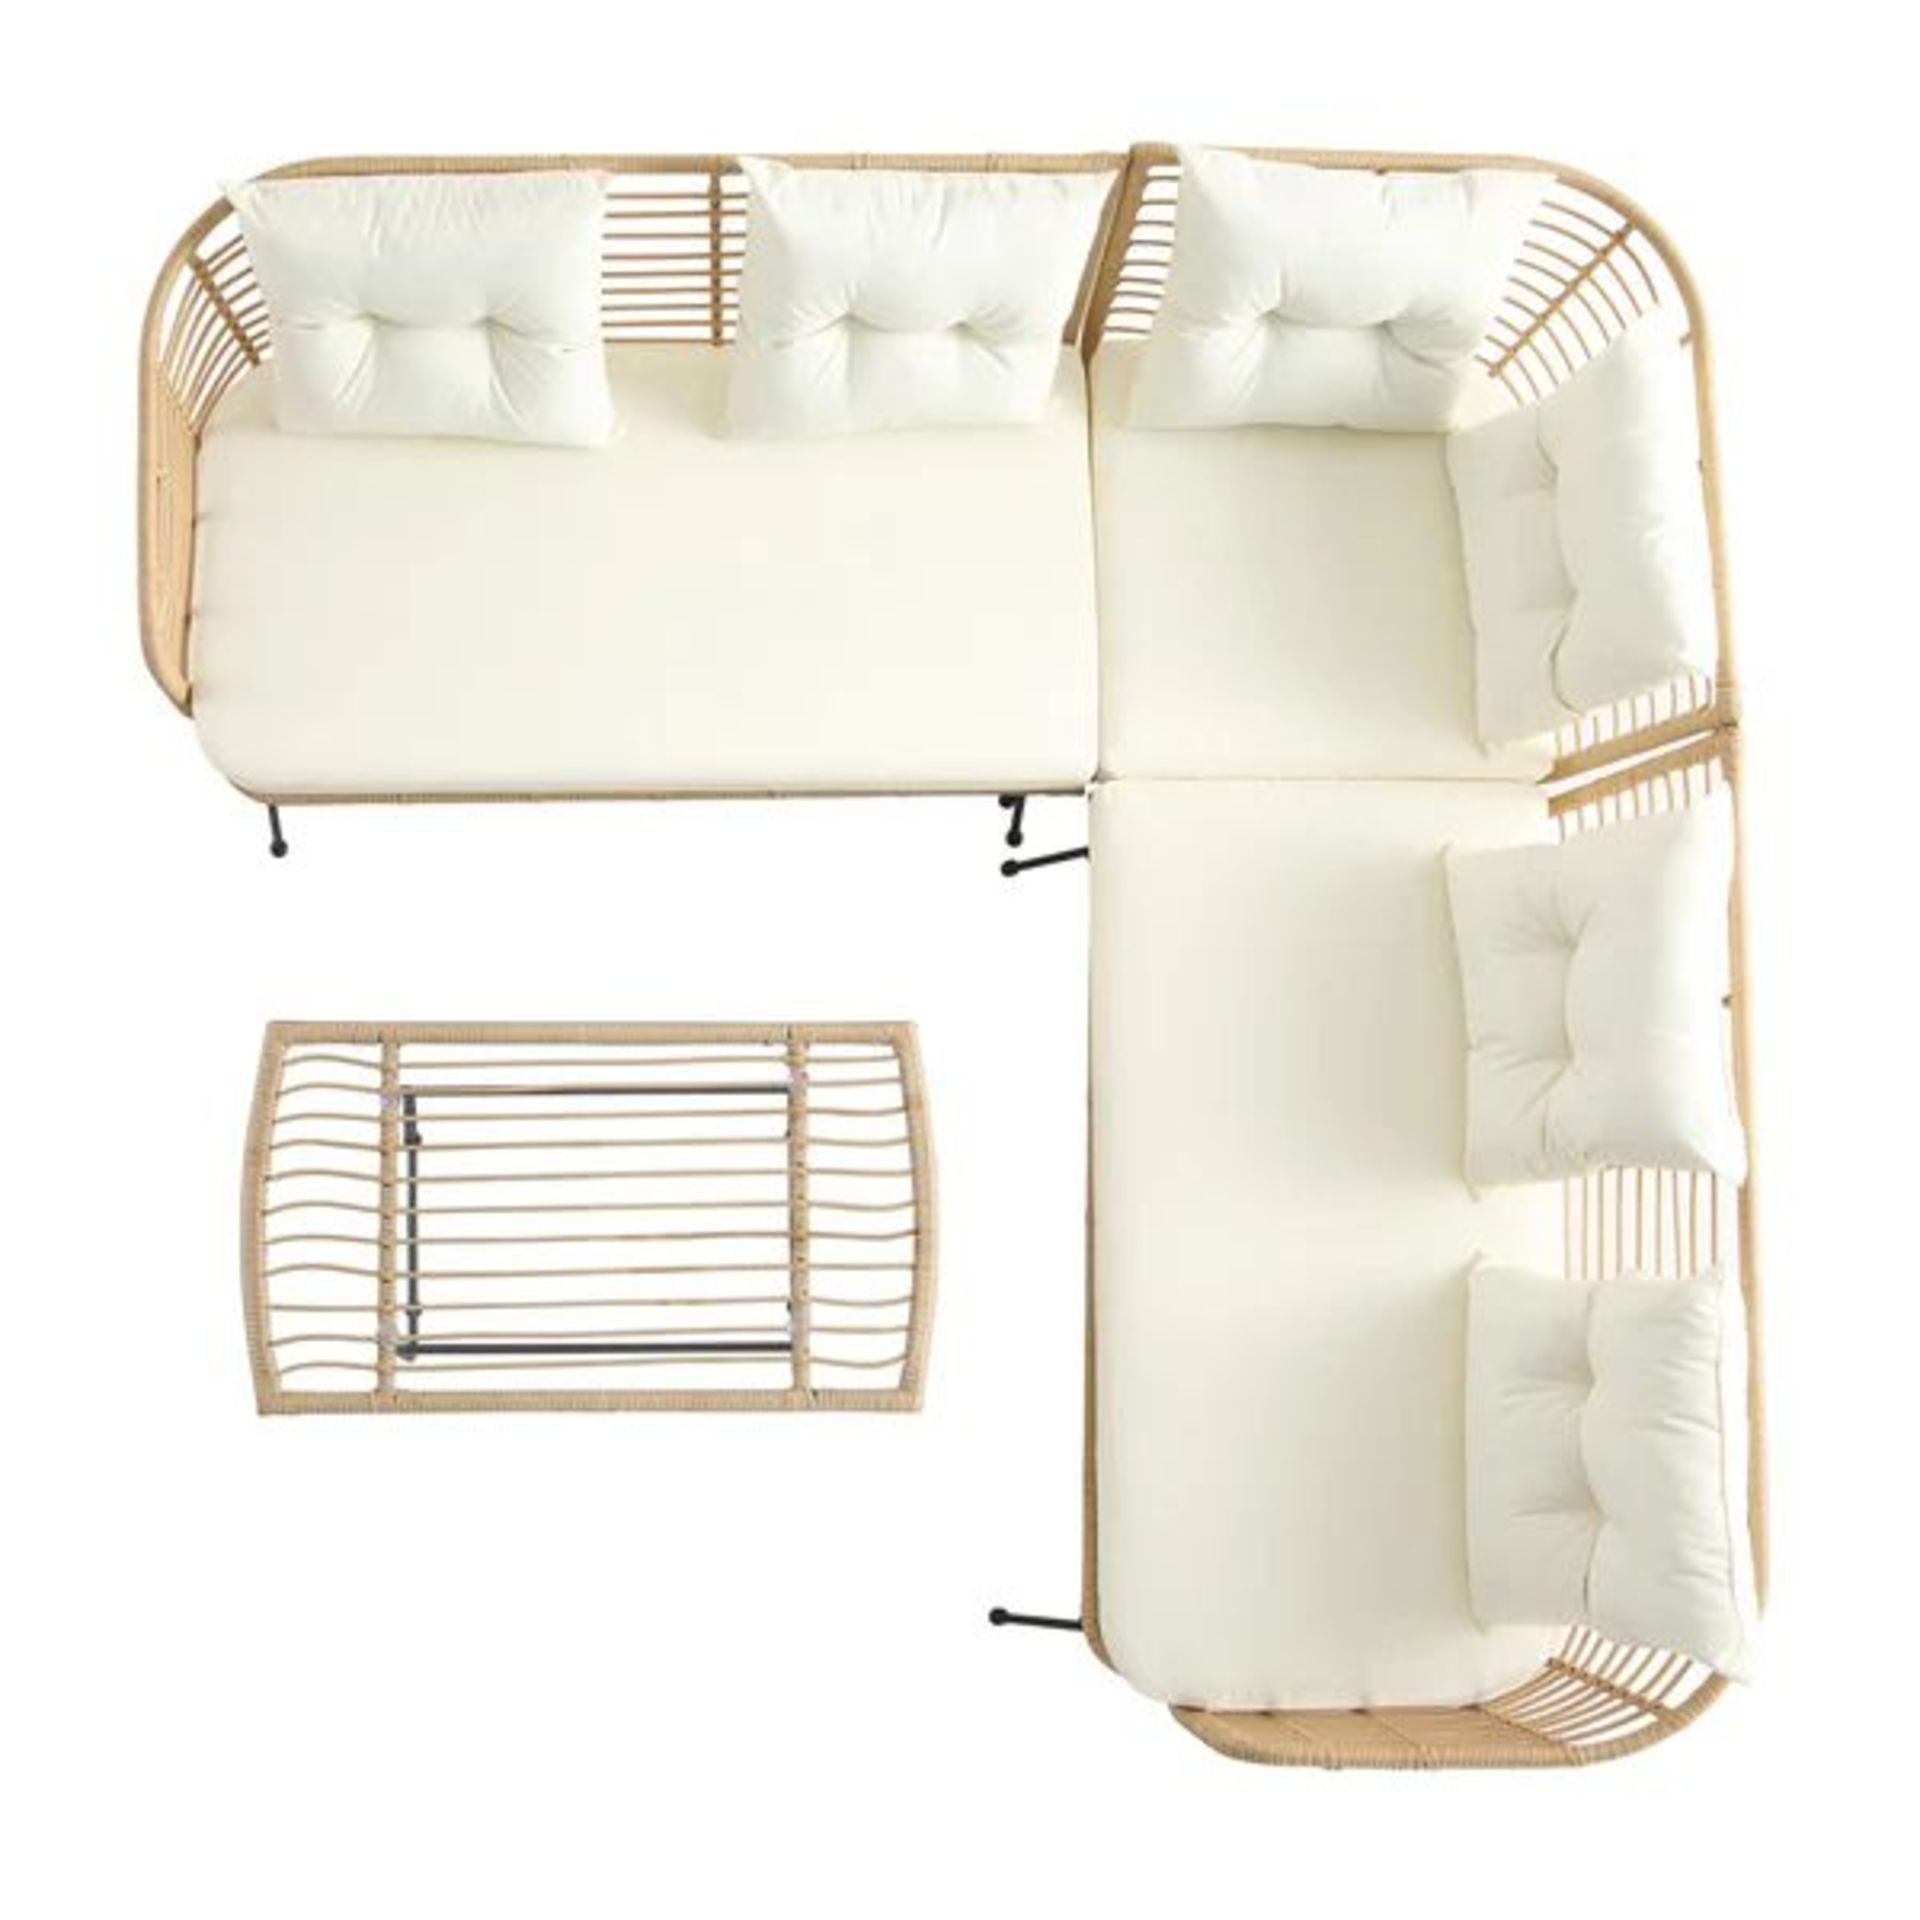 St Loy Natural Rattan Corner Sofa Set with Table. - R19.4. RRP £799.99. Comprising of two 2-seater - Bild 2 aus 2